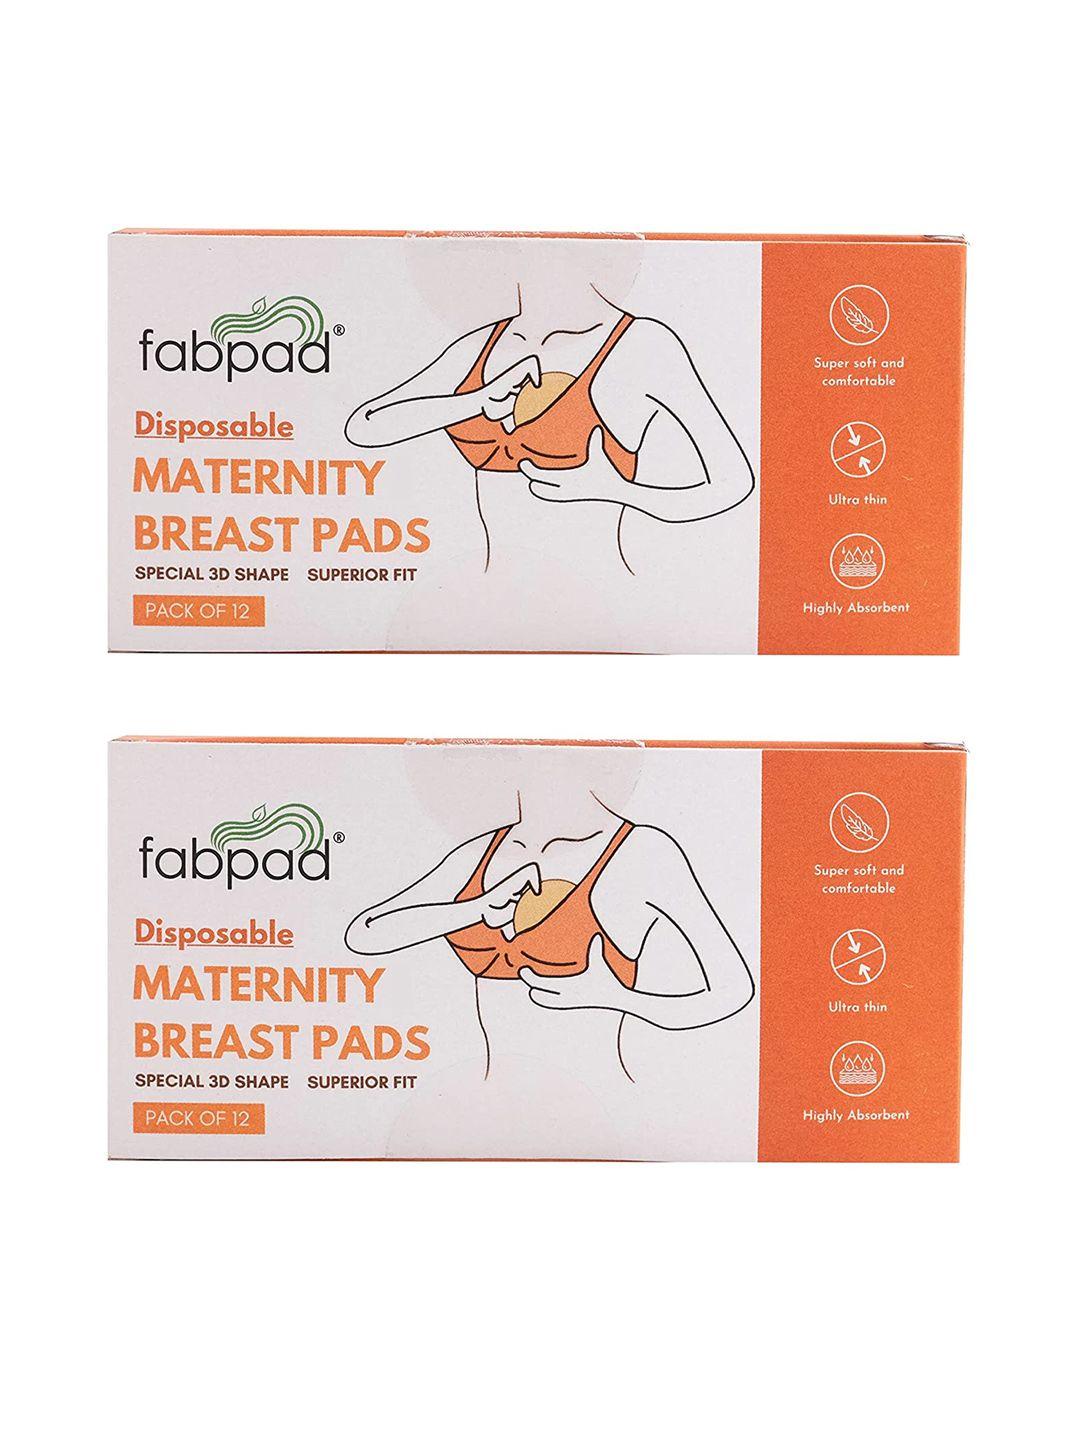 fabpad set of 2 disposable maternity nursing breast pads - 12 pieces each